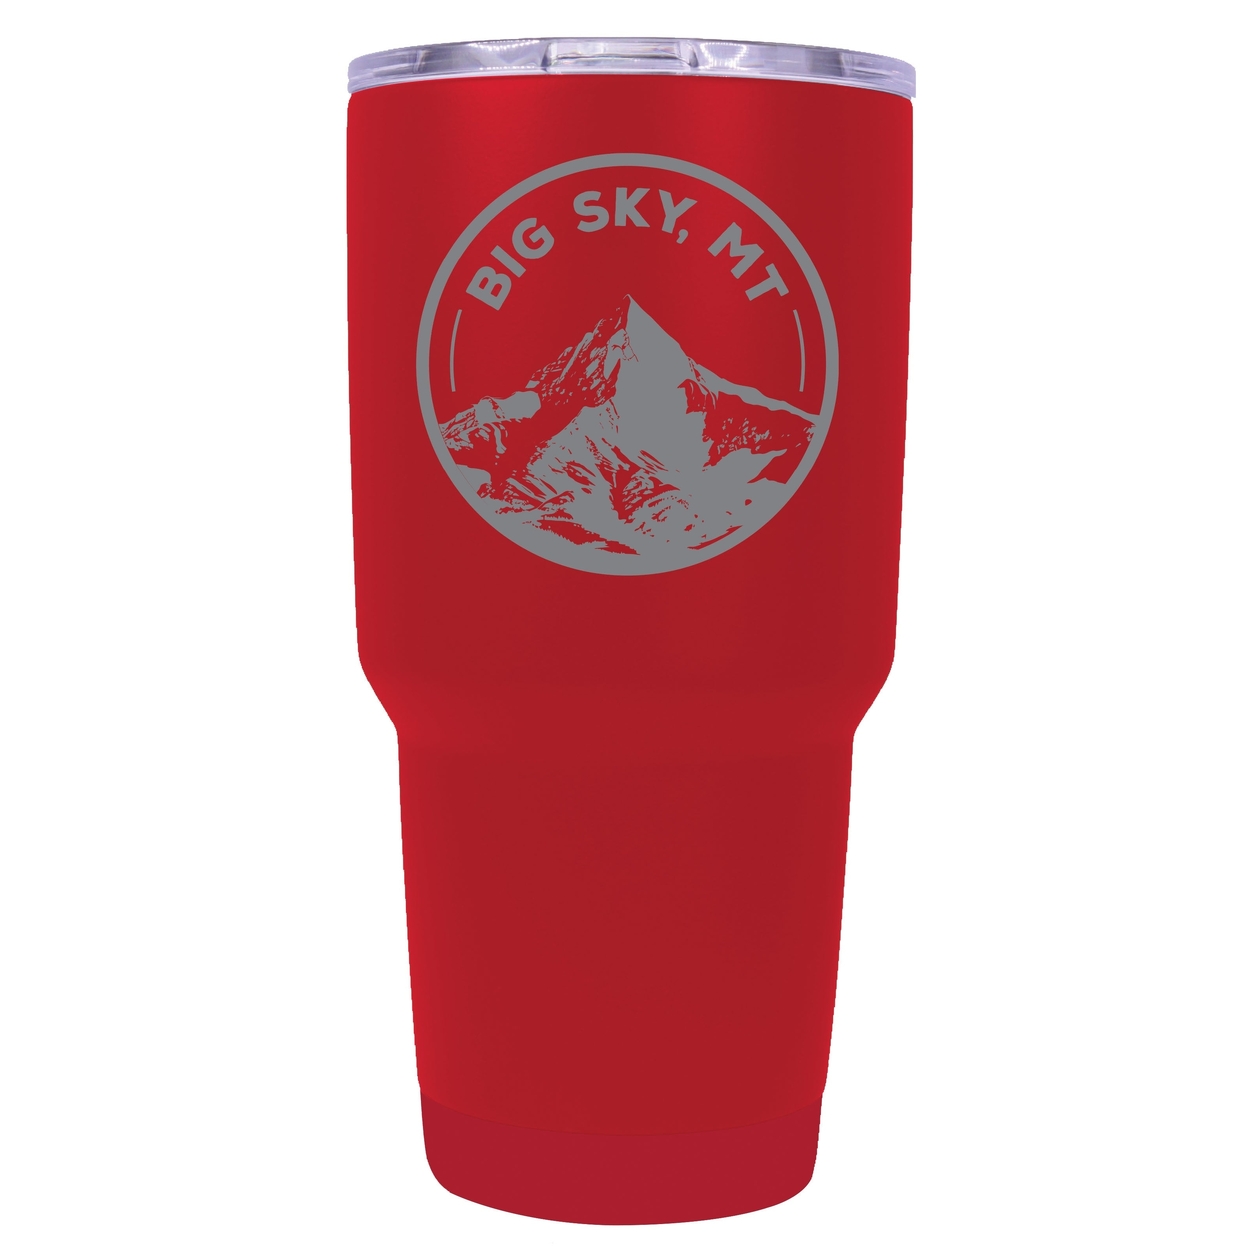 Big Sky Montana Souvenir 24 Oz Engraved Insulated Stainless Steel Tumbler - Green,,4-Pack